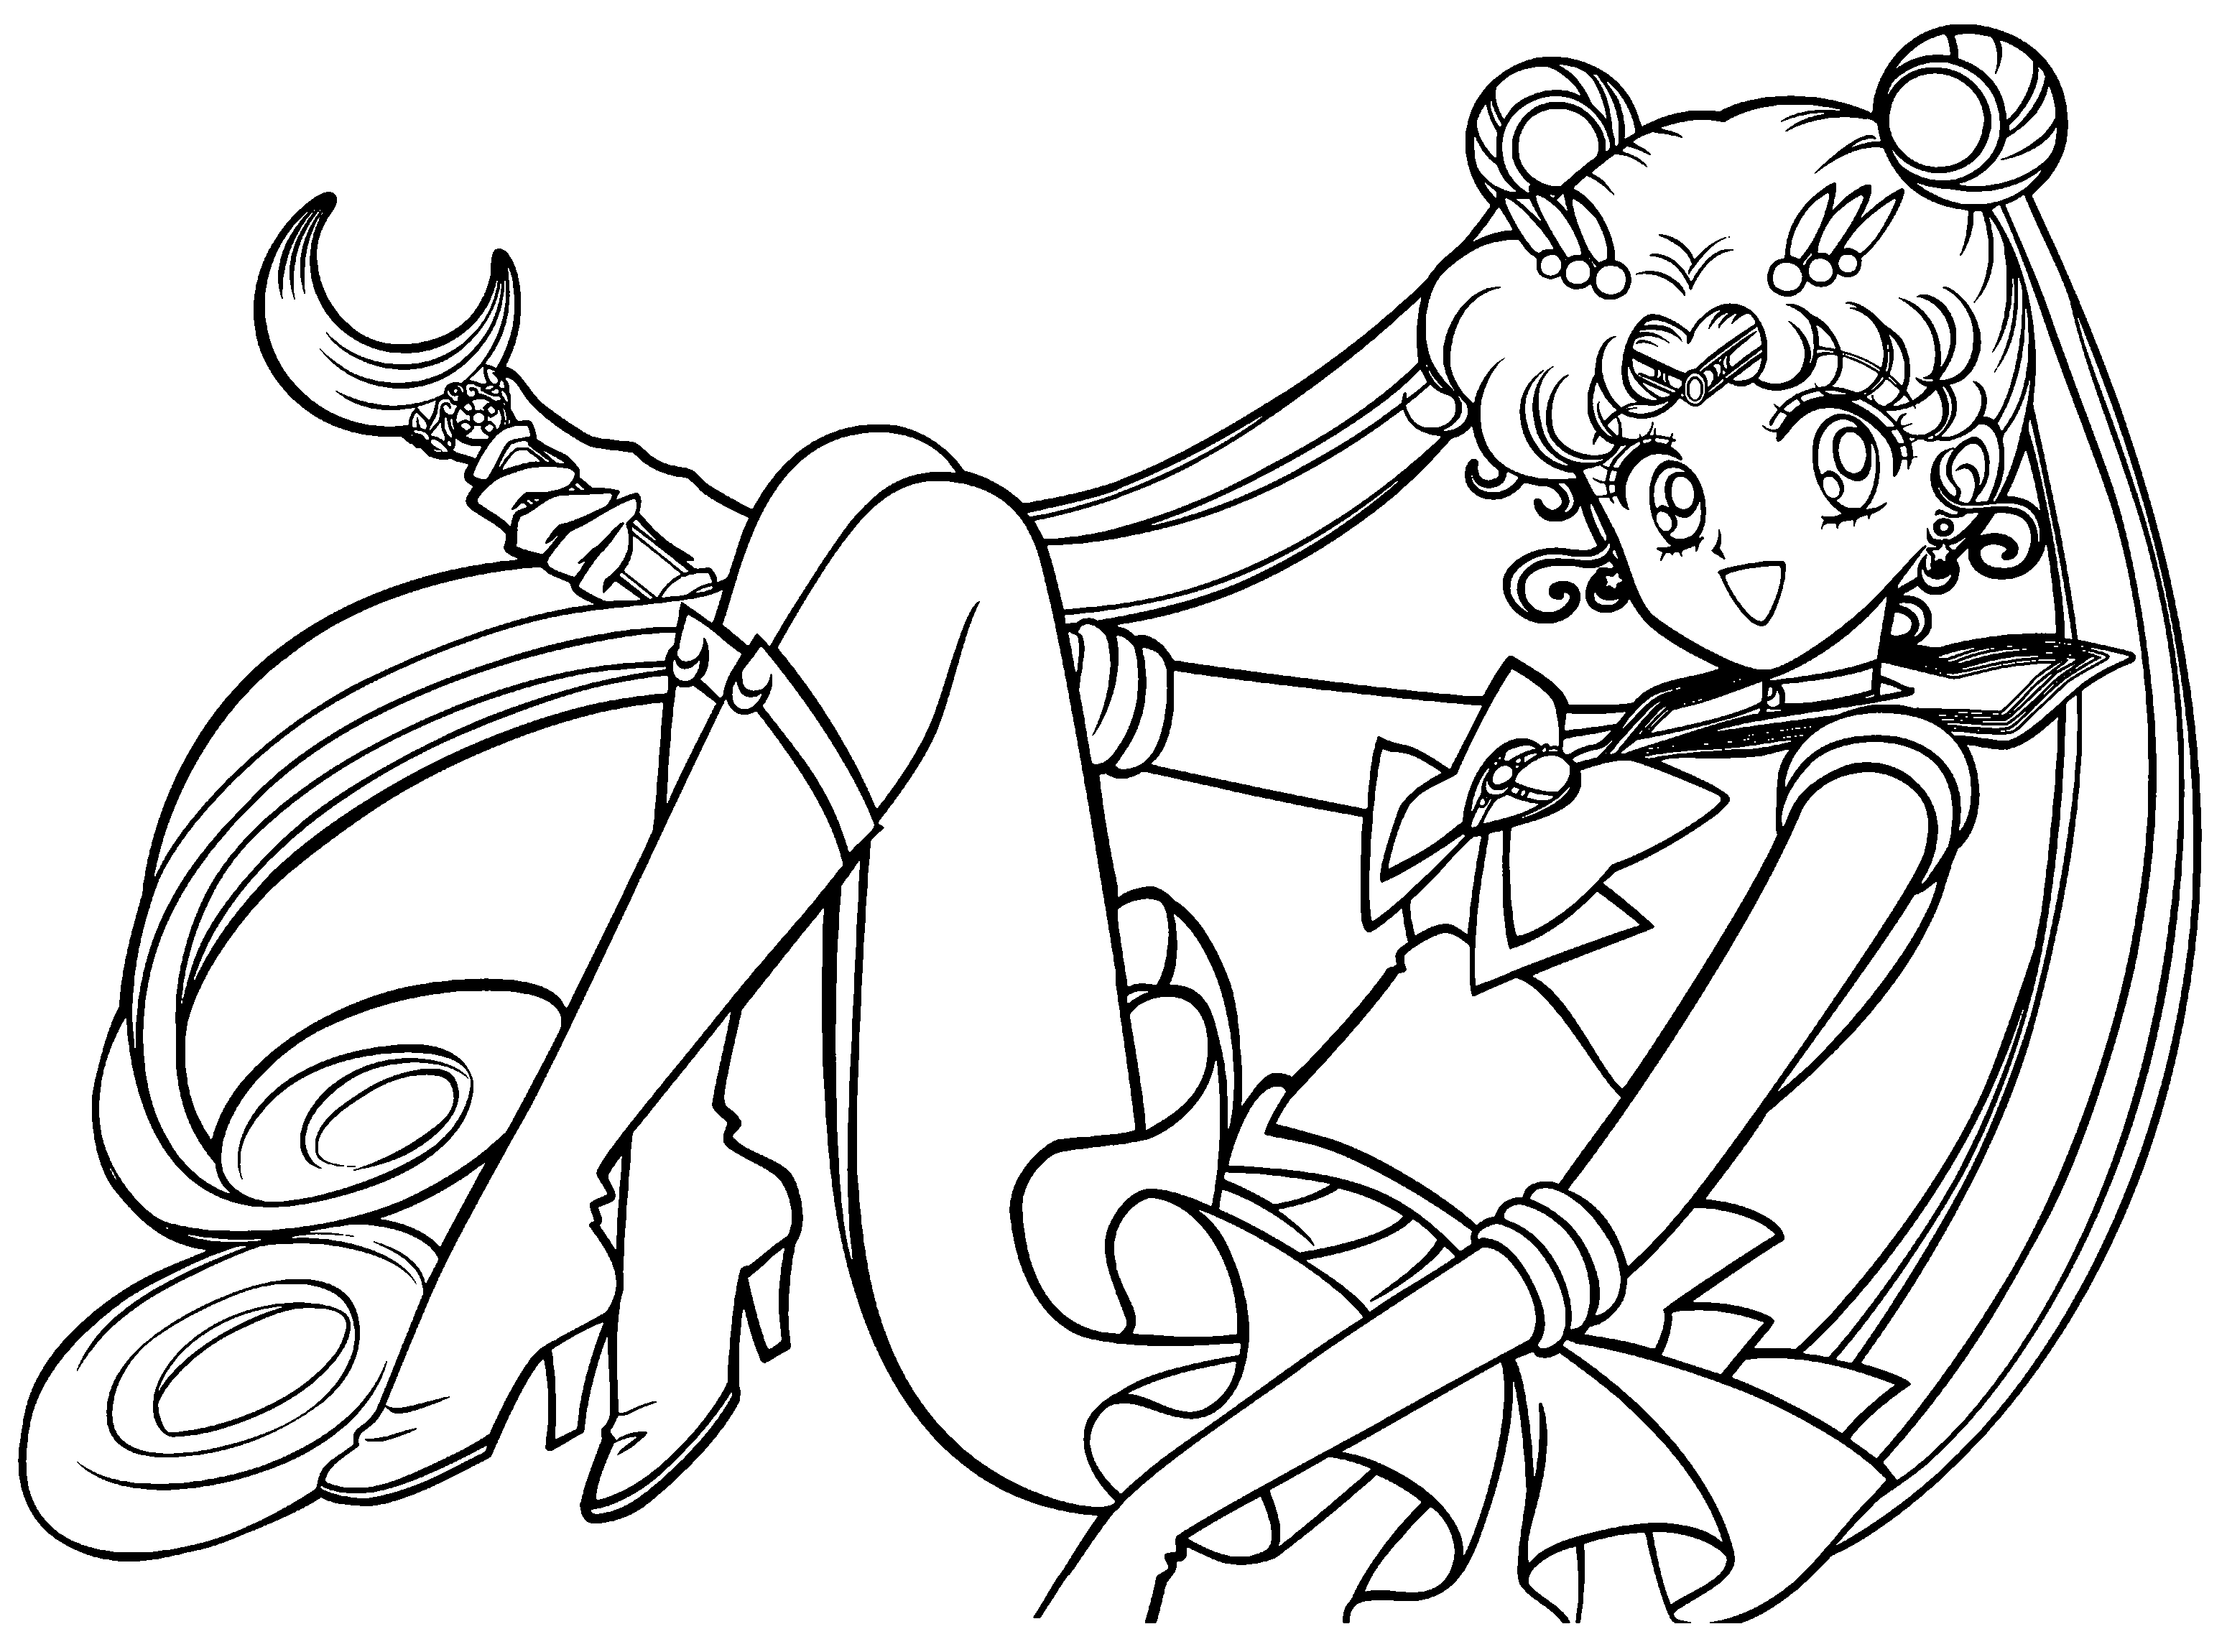 Sailor Moon Coloring Book   Coloring Pages For Kids And For Adults ...